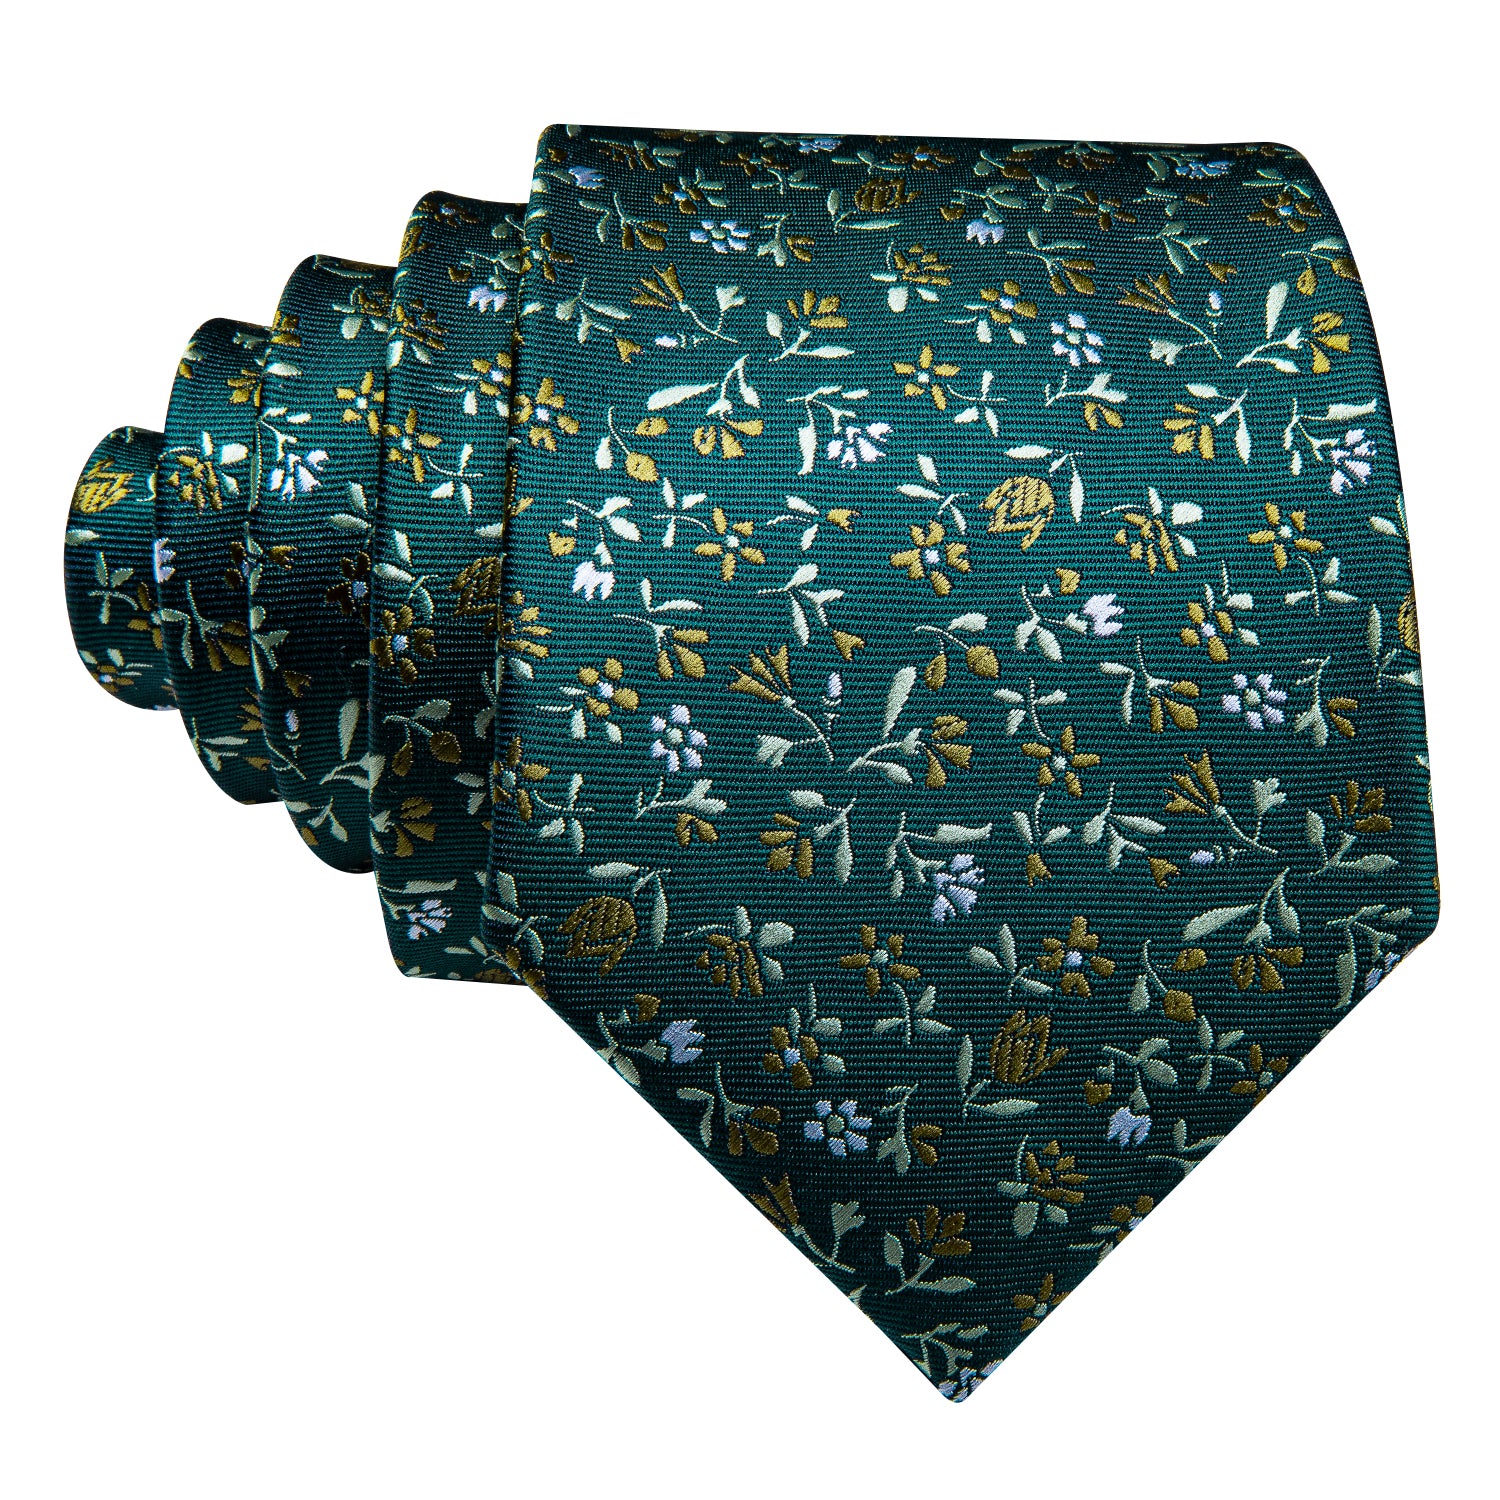 Green Small Floral Tie Pocket Square Cufflinks Set